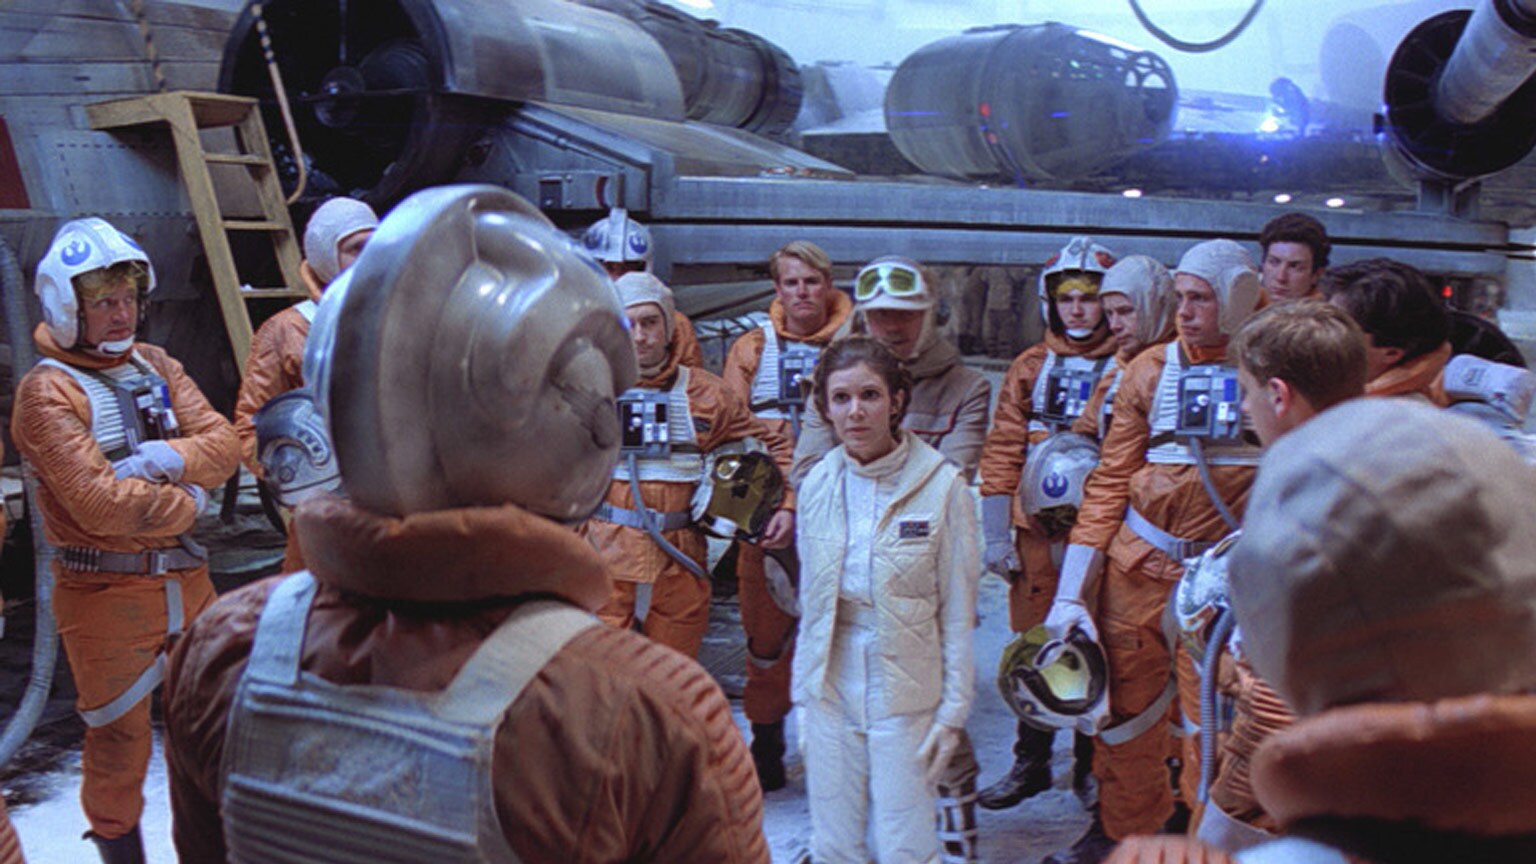 Princess Leia addresses a group of Rebel pilots who stand in a circle around her in The Empire Strikes Back.